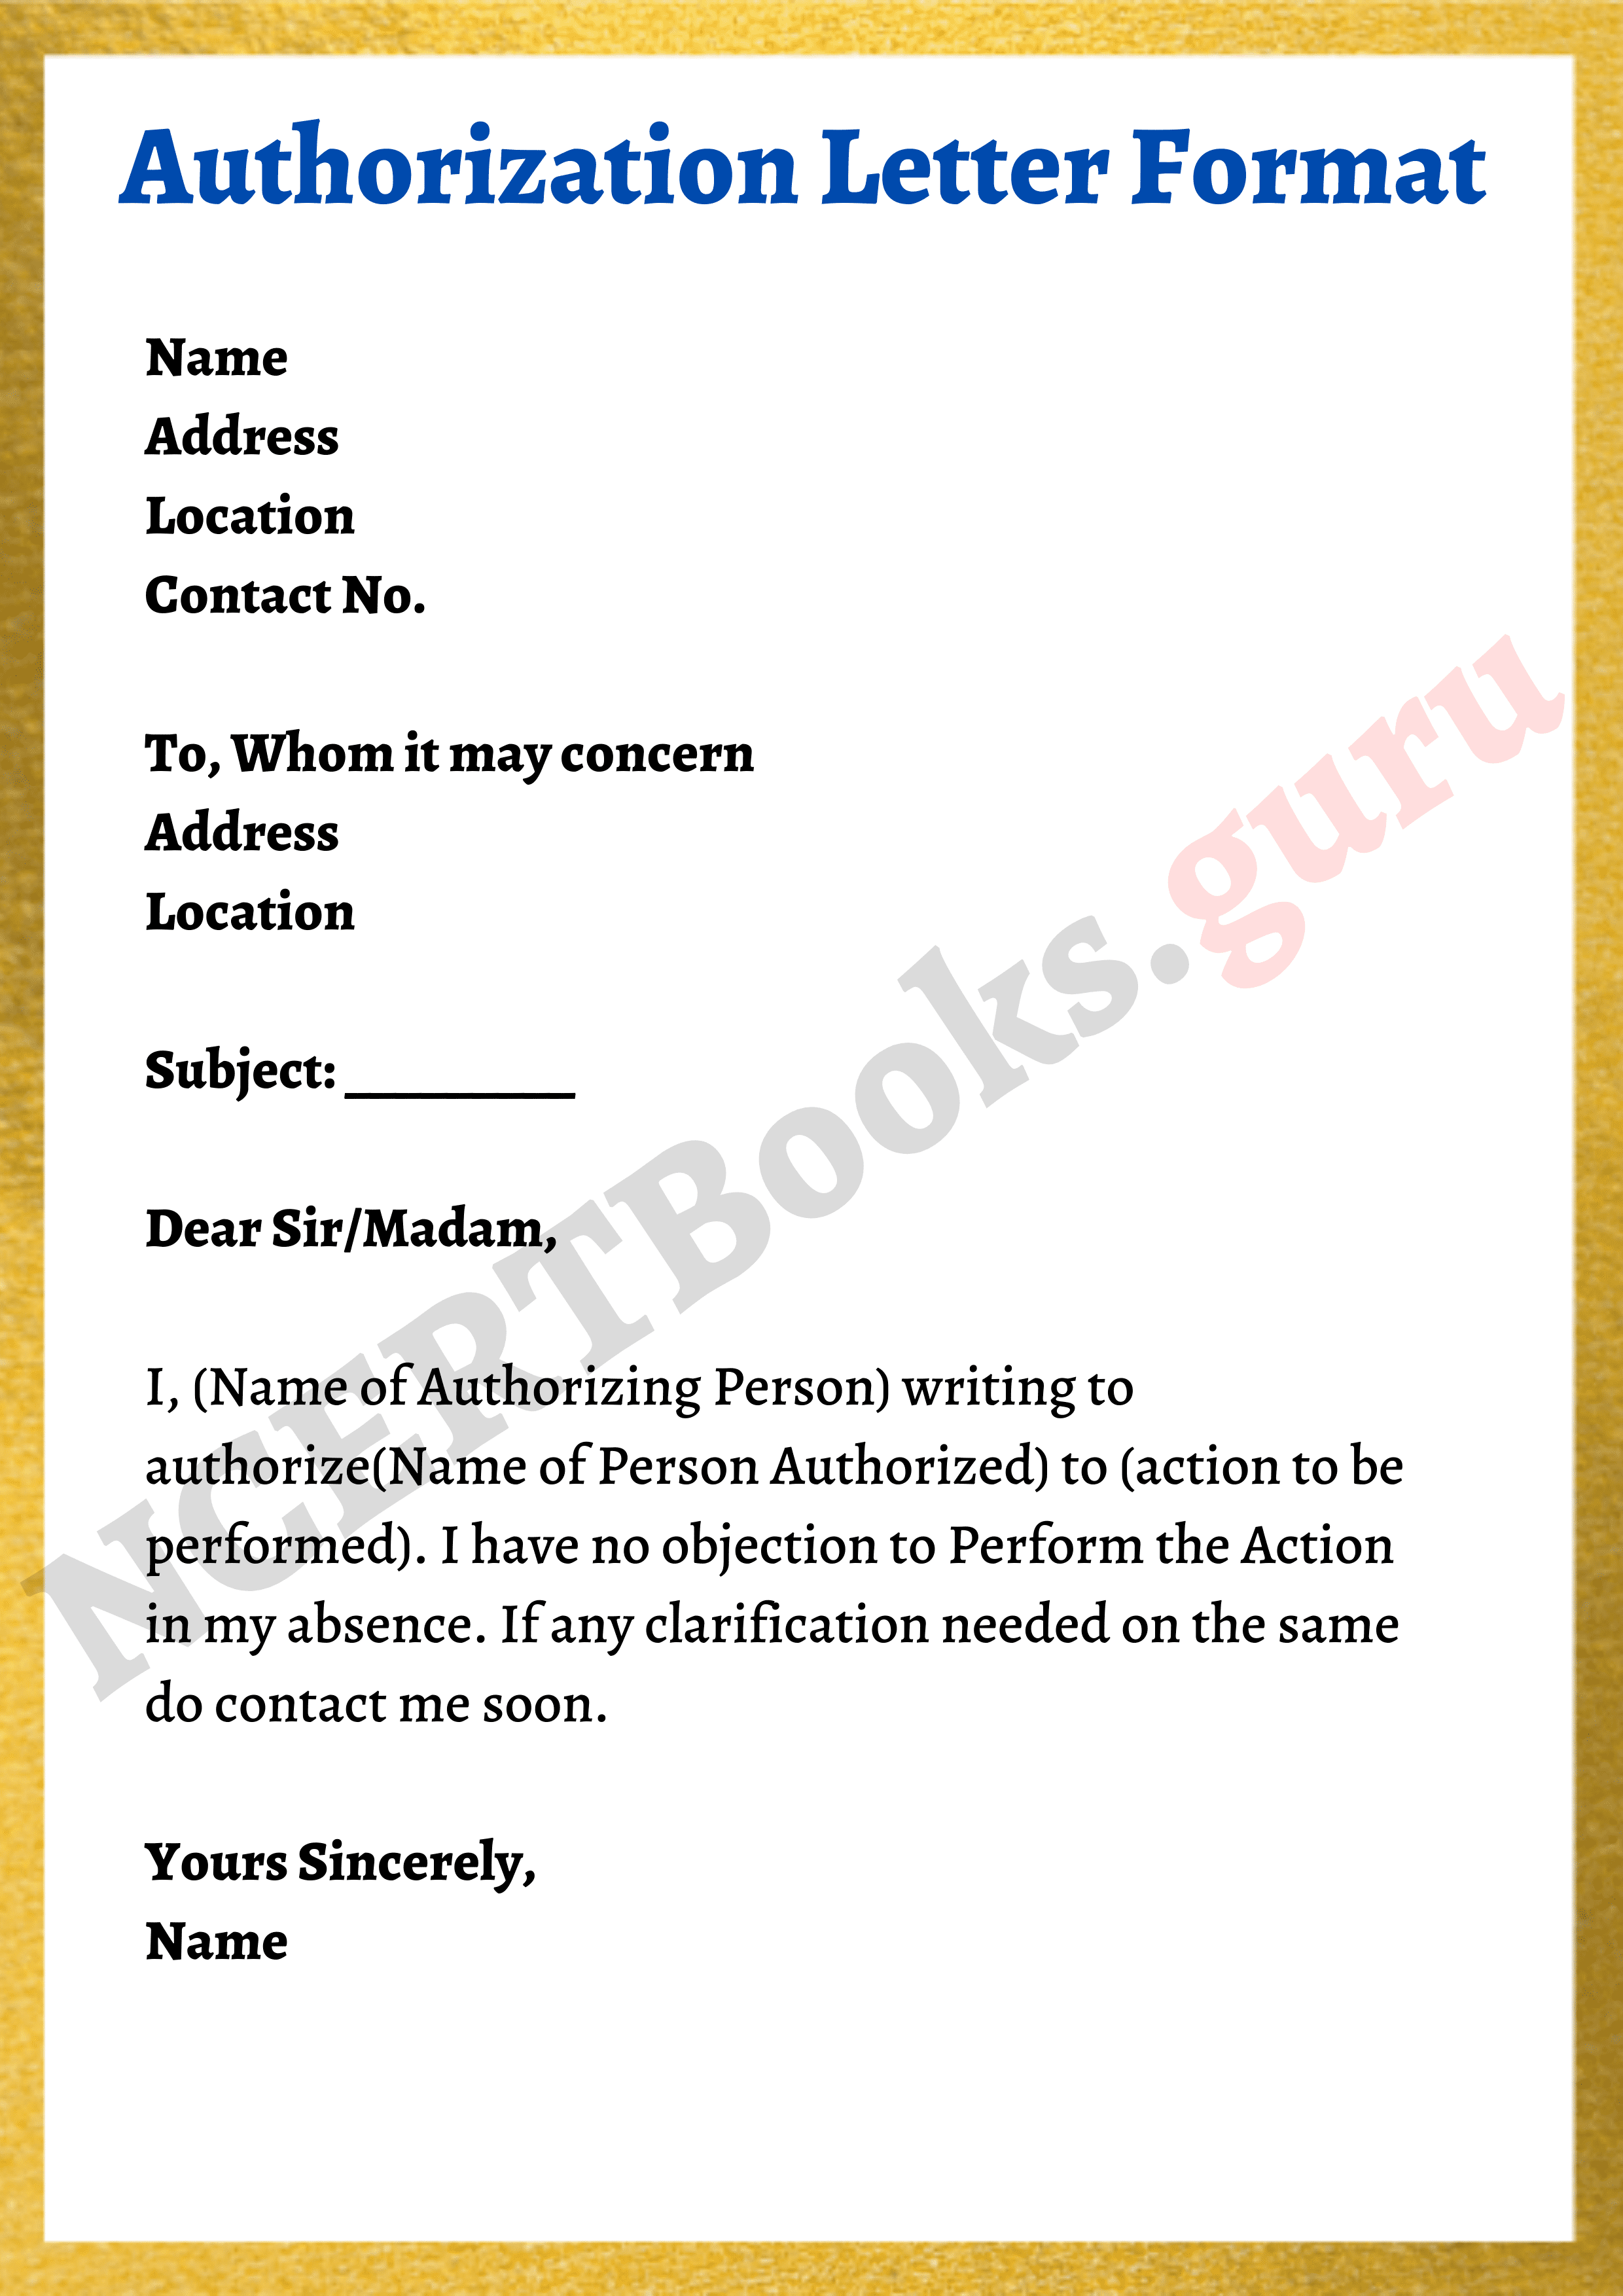 Authorization Letter Template, Samples | How to write an Authorization ...